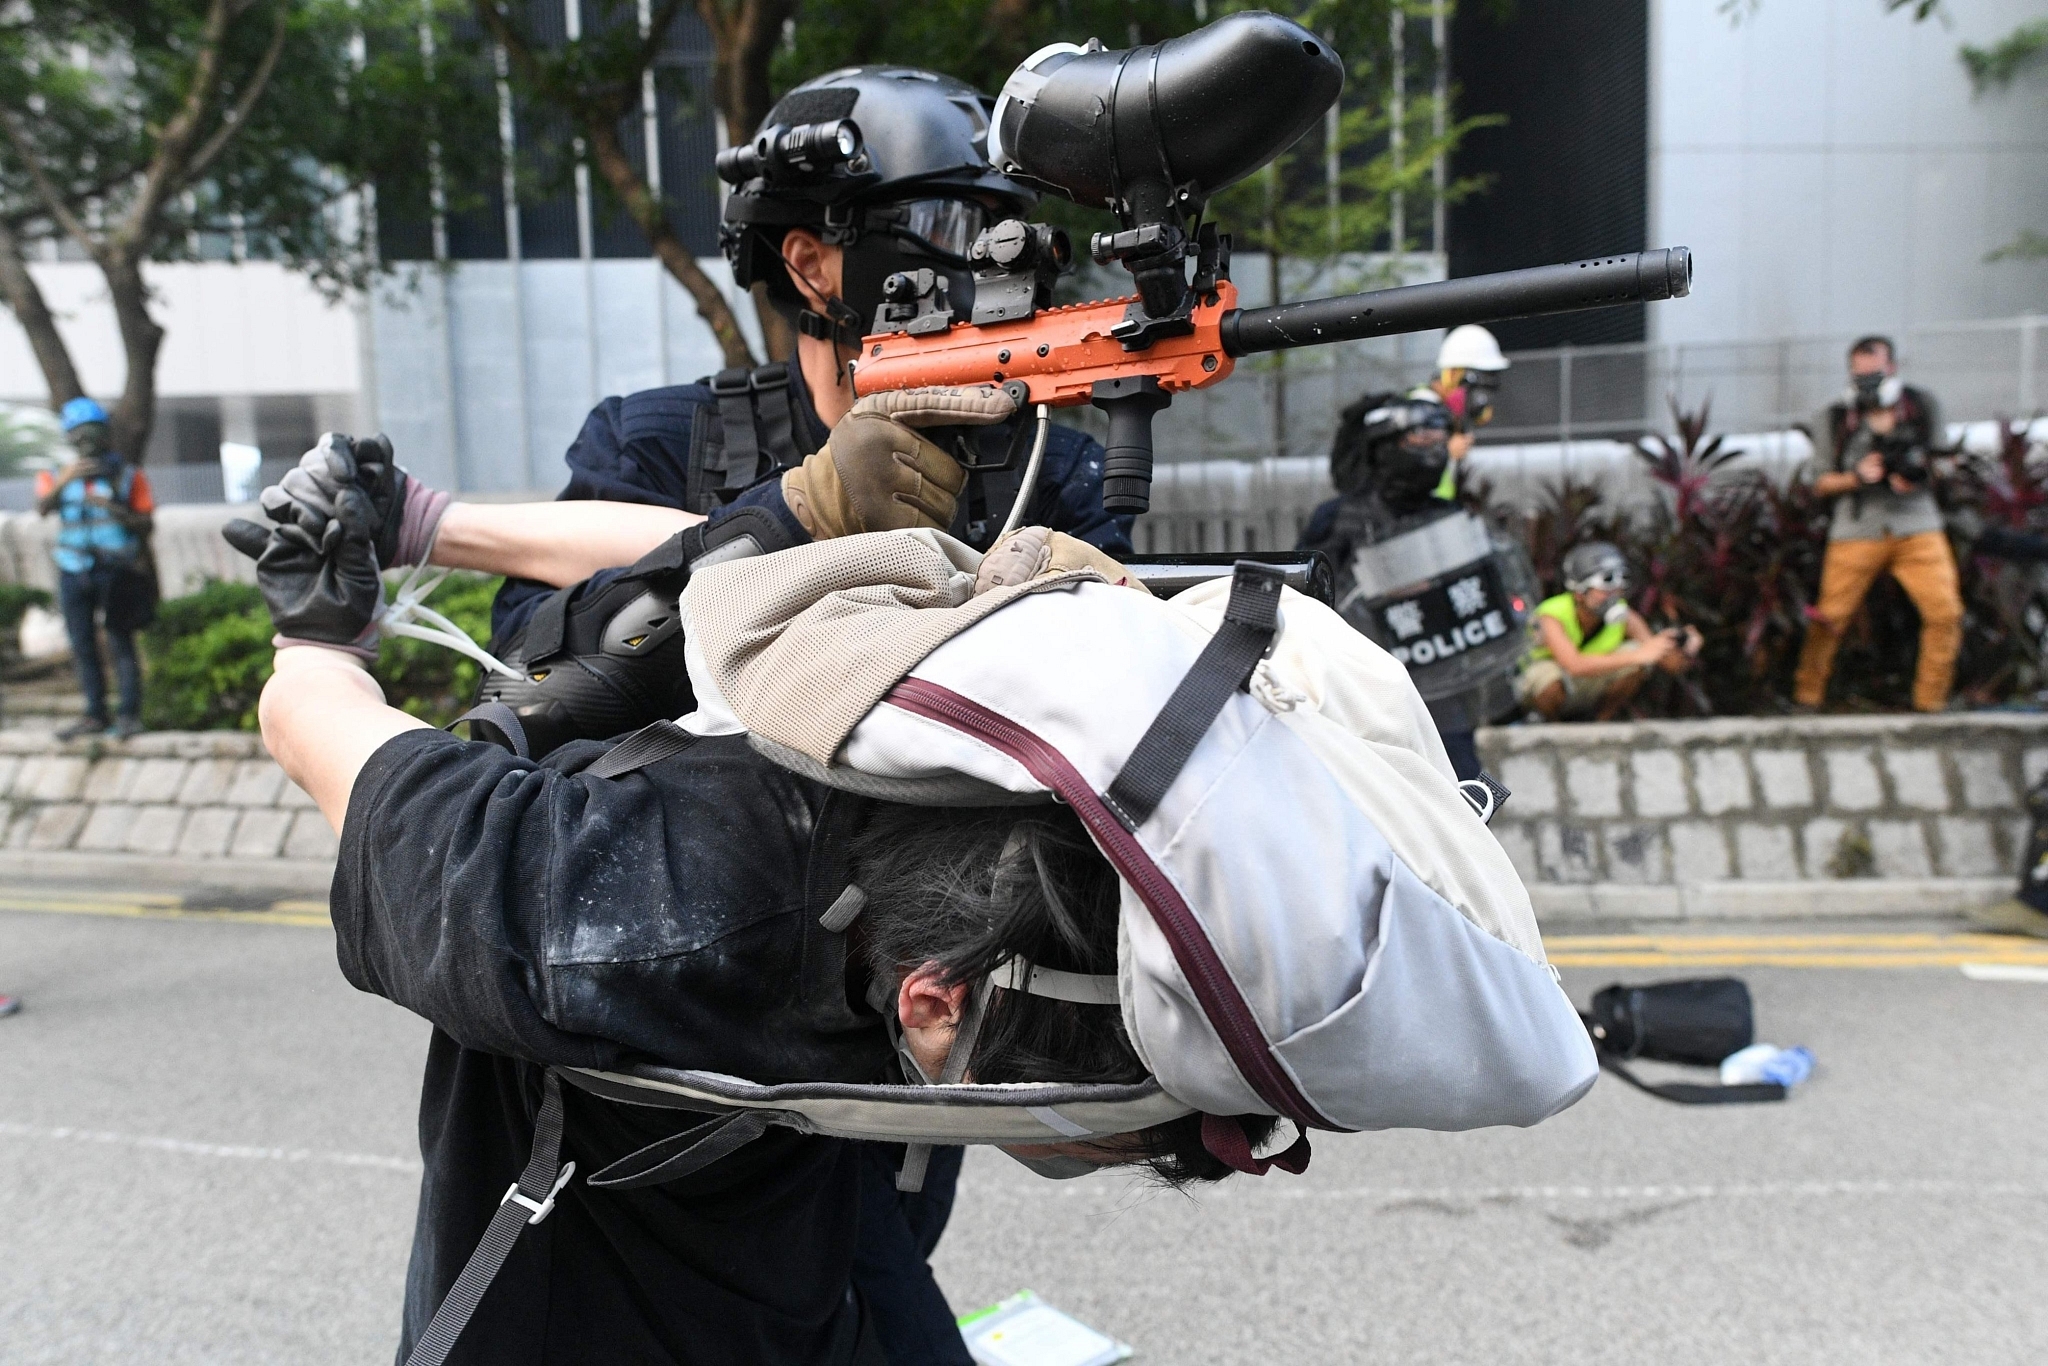 Hong Kong Police using subdued protester as gun mount.(via Twitter)